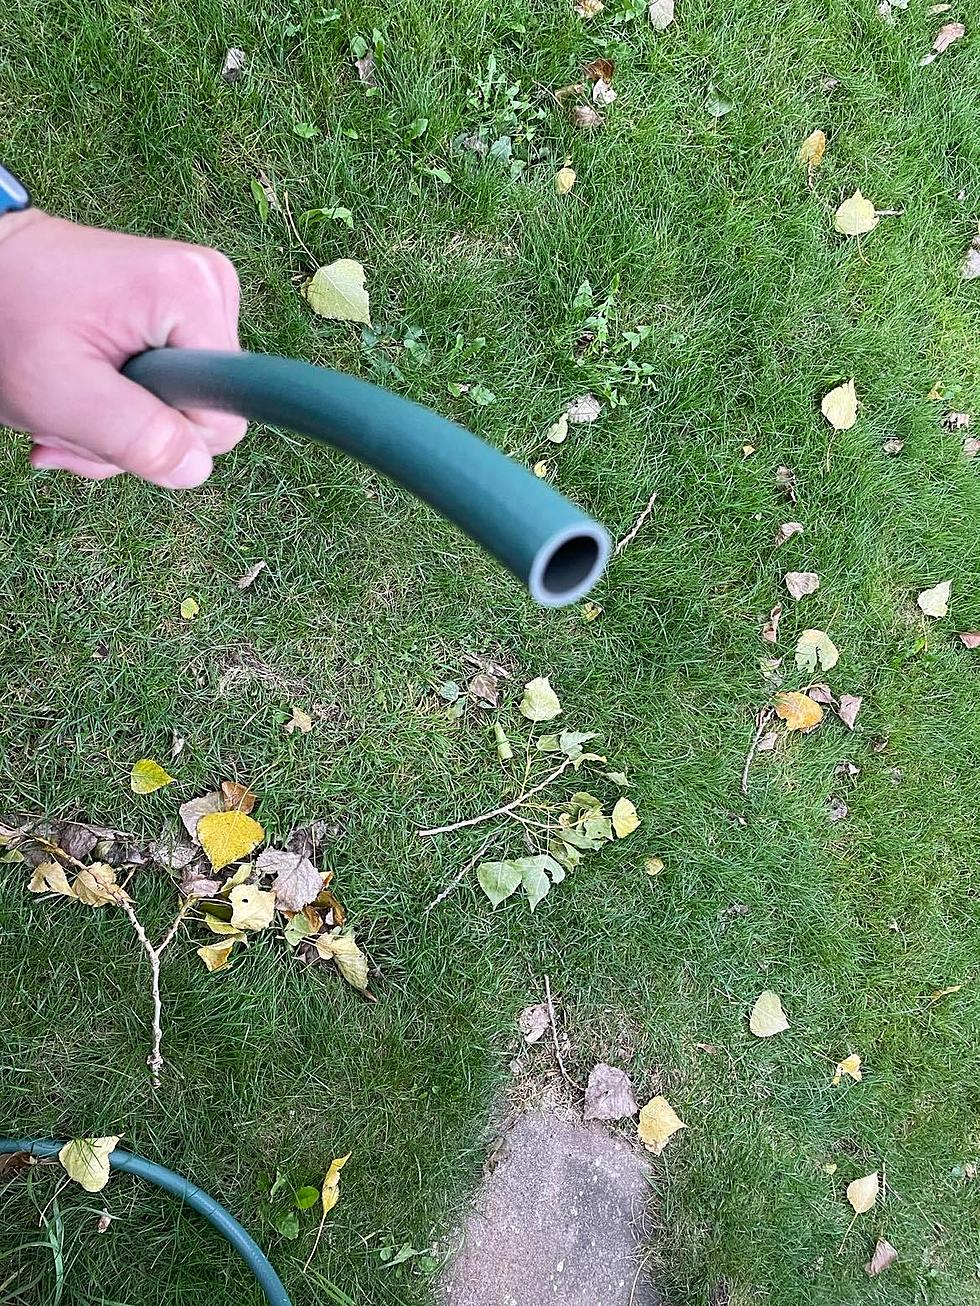 Did Someone Cut Your Garden Hose? Here’s Probably Why